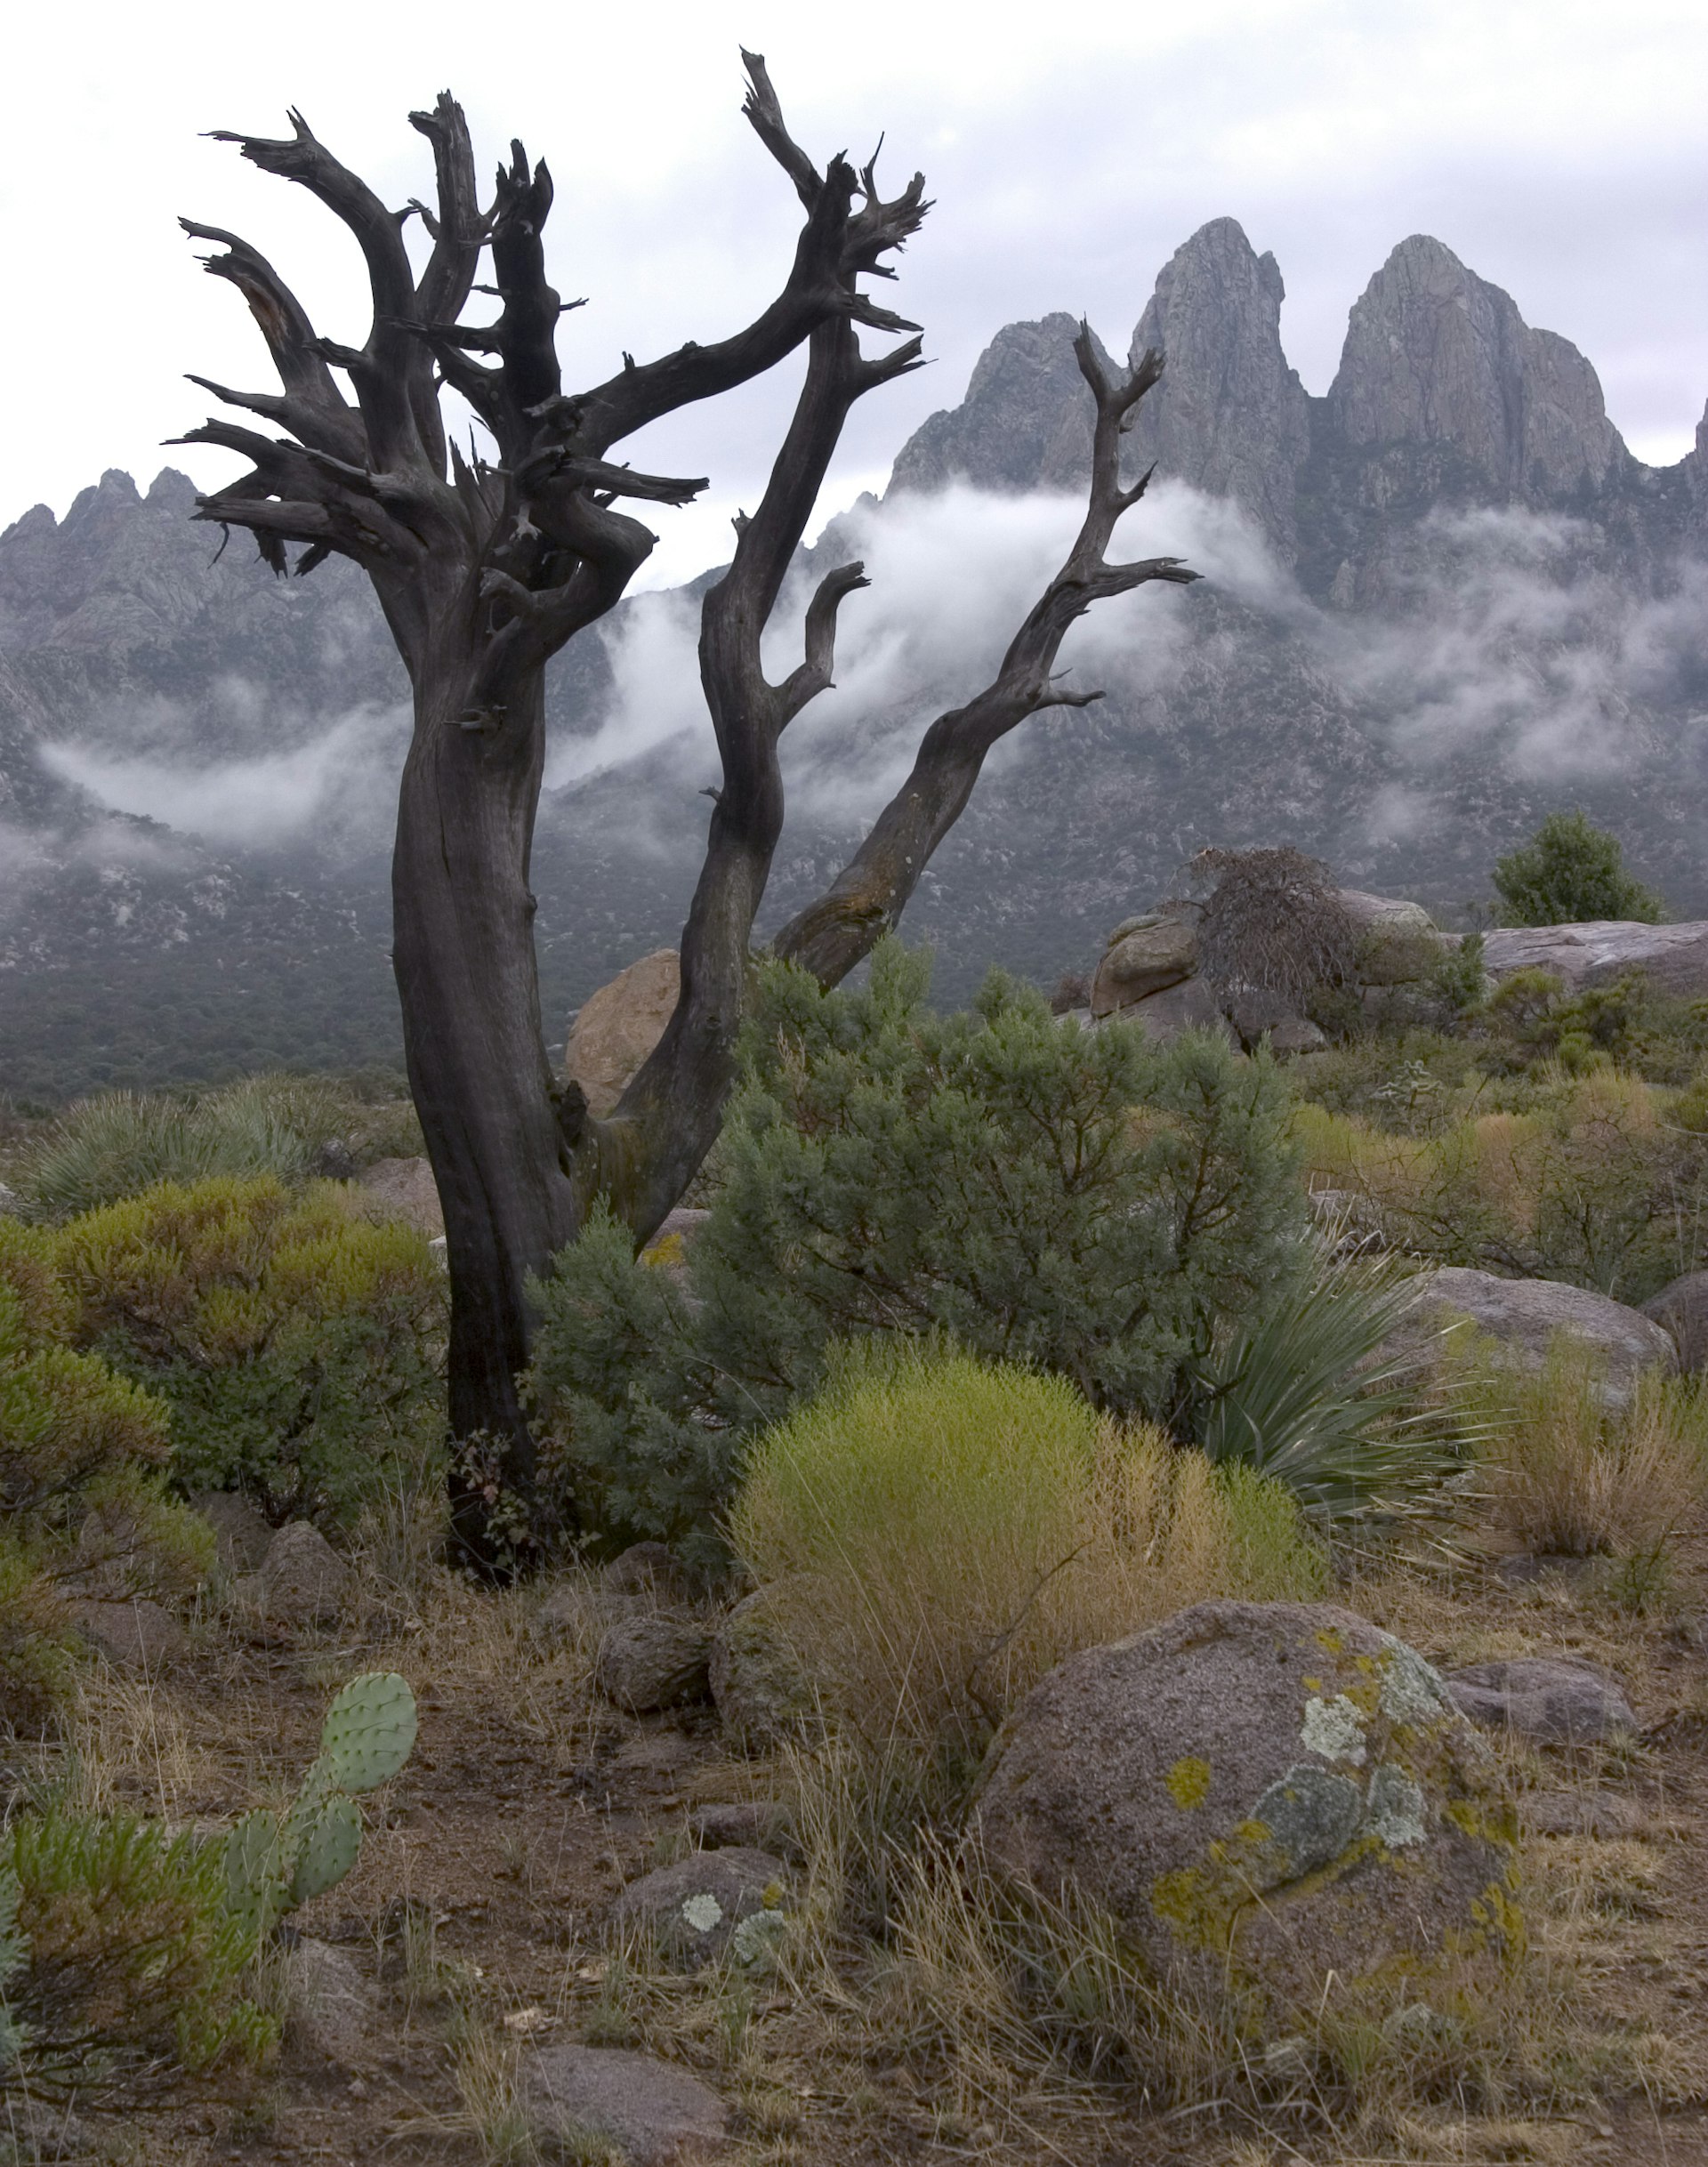 A crooked tree with no leaves stands in the foreground as jagged peaks covered in a light mist can be seen in the background. The rest of the arid area is covered in low shrubs. 